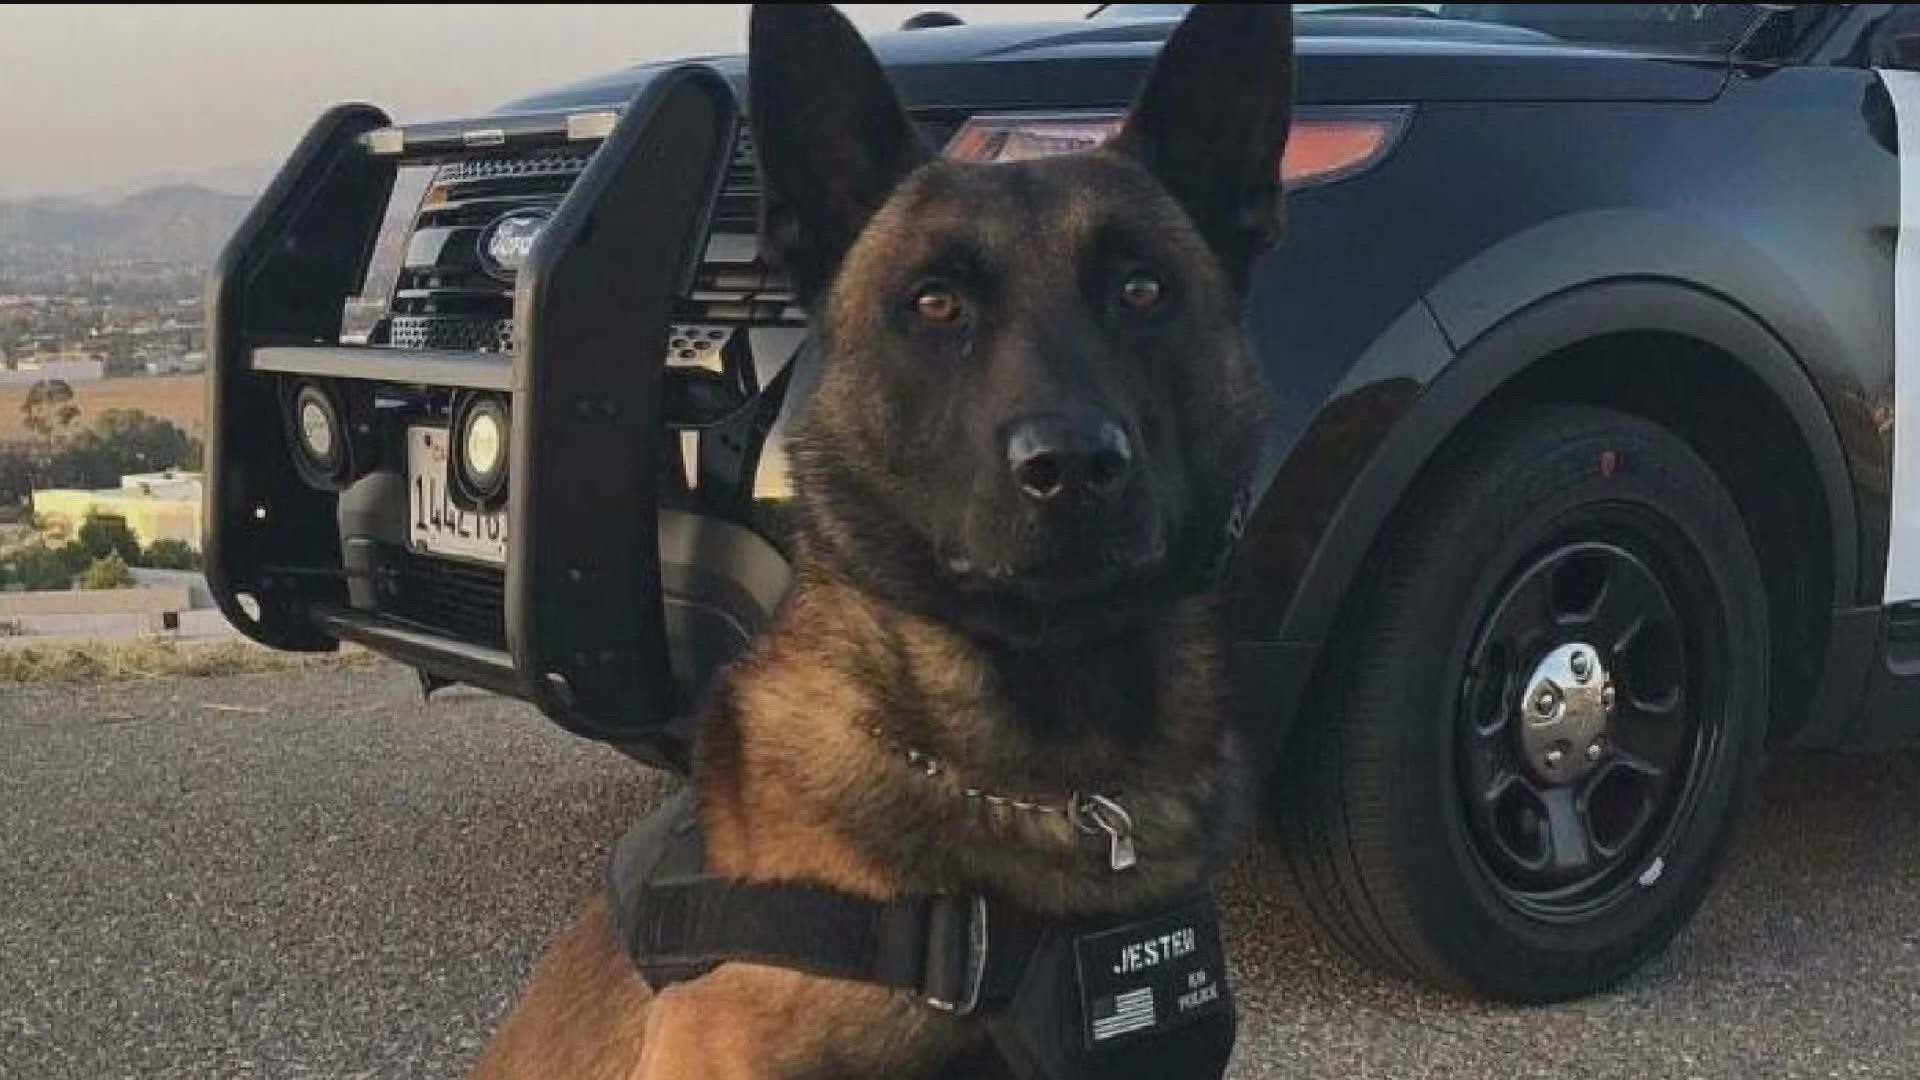 CBS 8 received new video of Jester, the K-9 police dog, as he is recovering from a stab wound after catching a suspect in El Cajon.